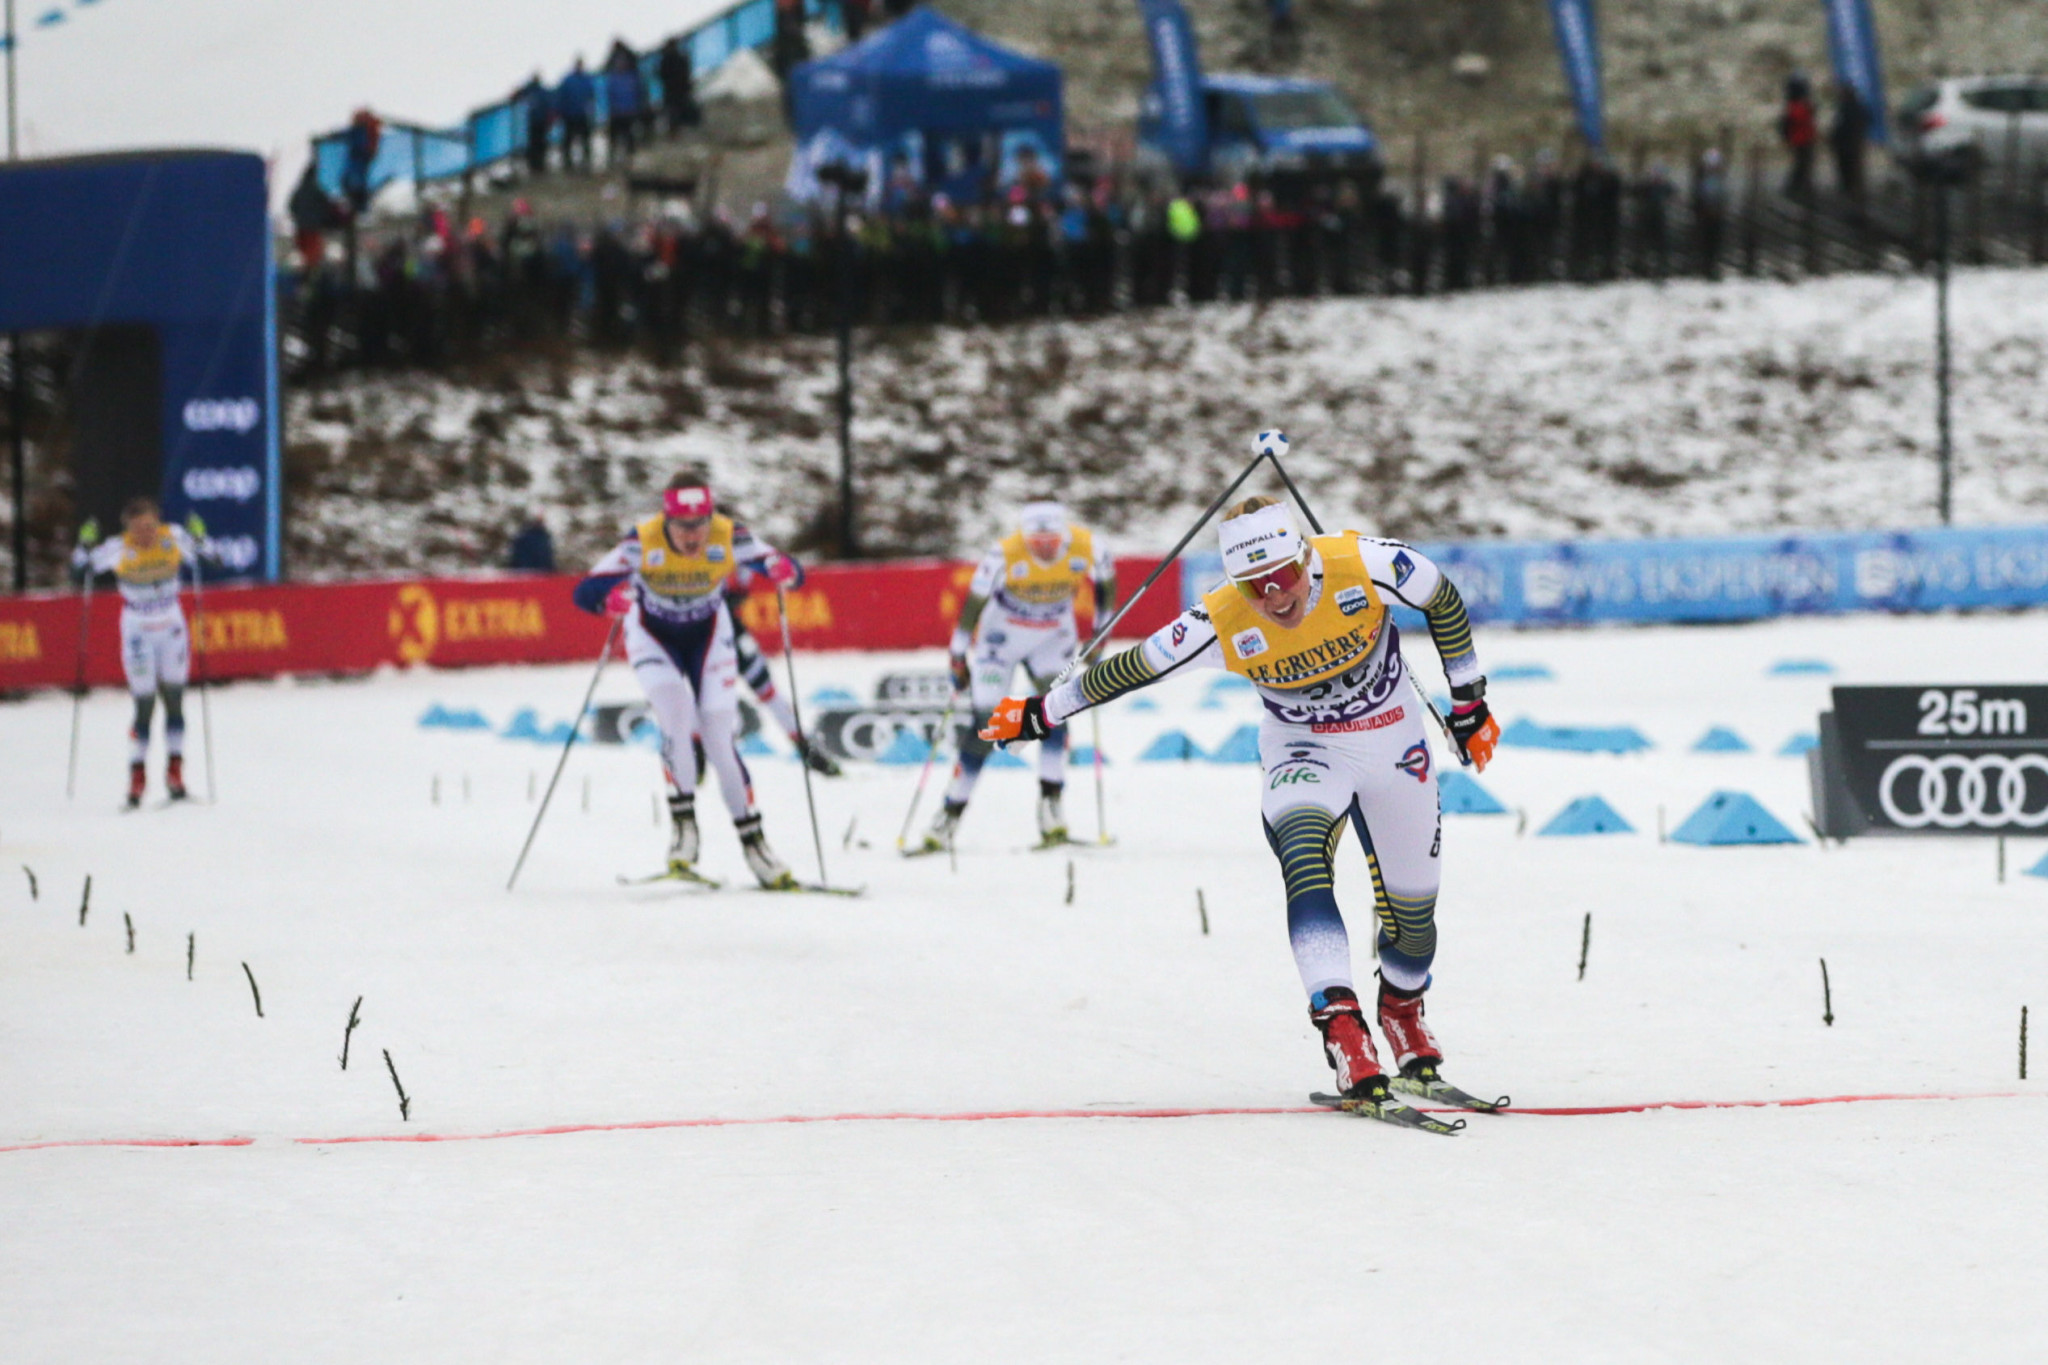 Sweden's Jonna Sundling tasted victory today at the FIS Cross-Country World Cup ©Getty Images